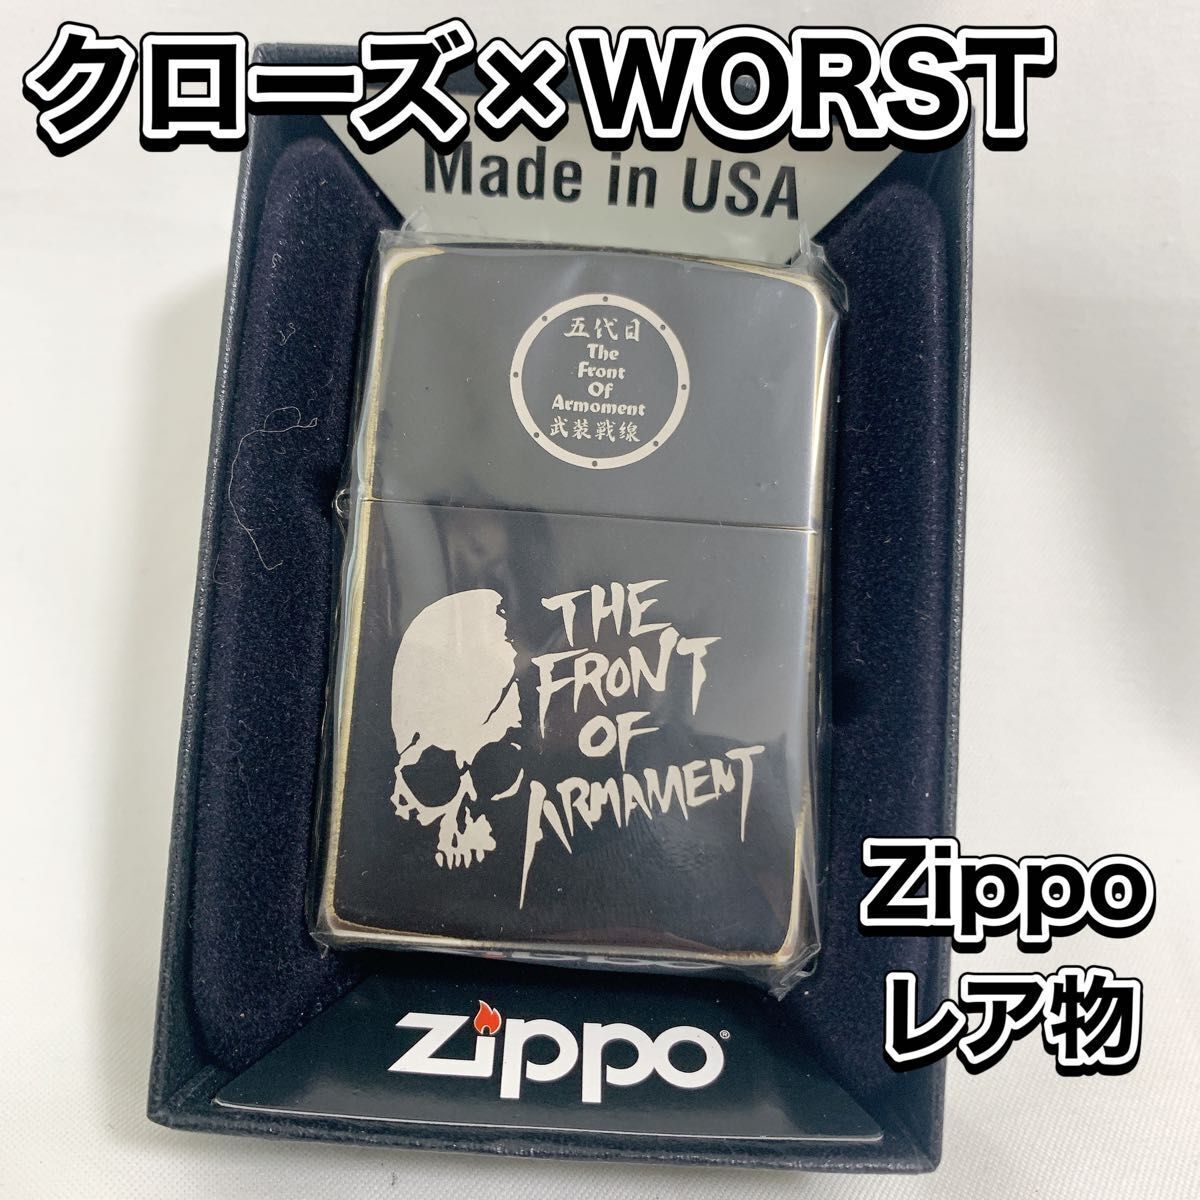 Zippo Rare Close WORST 5th Generation Armed Front New Oil Lighter to